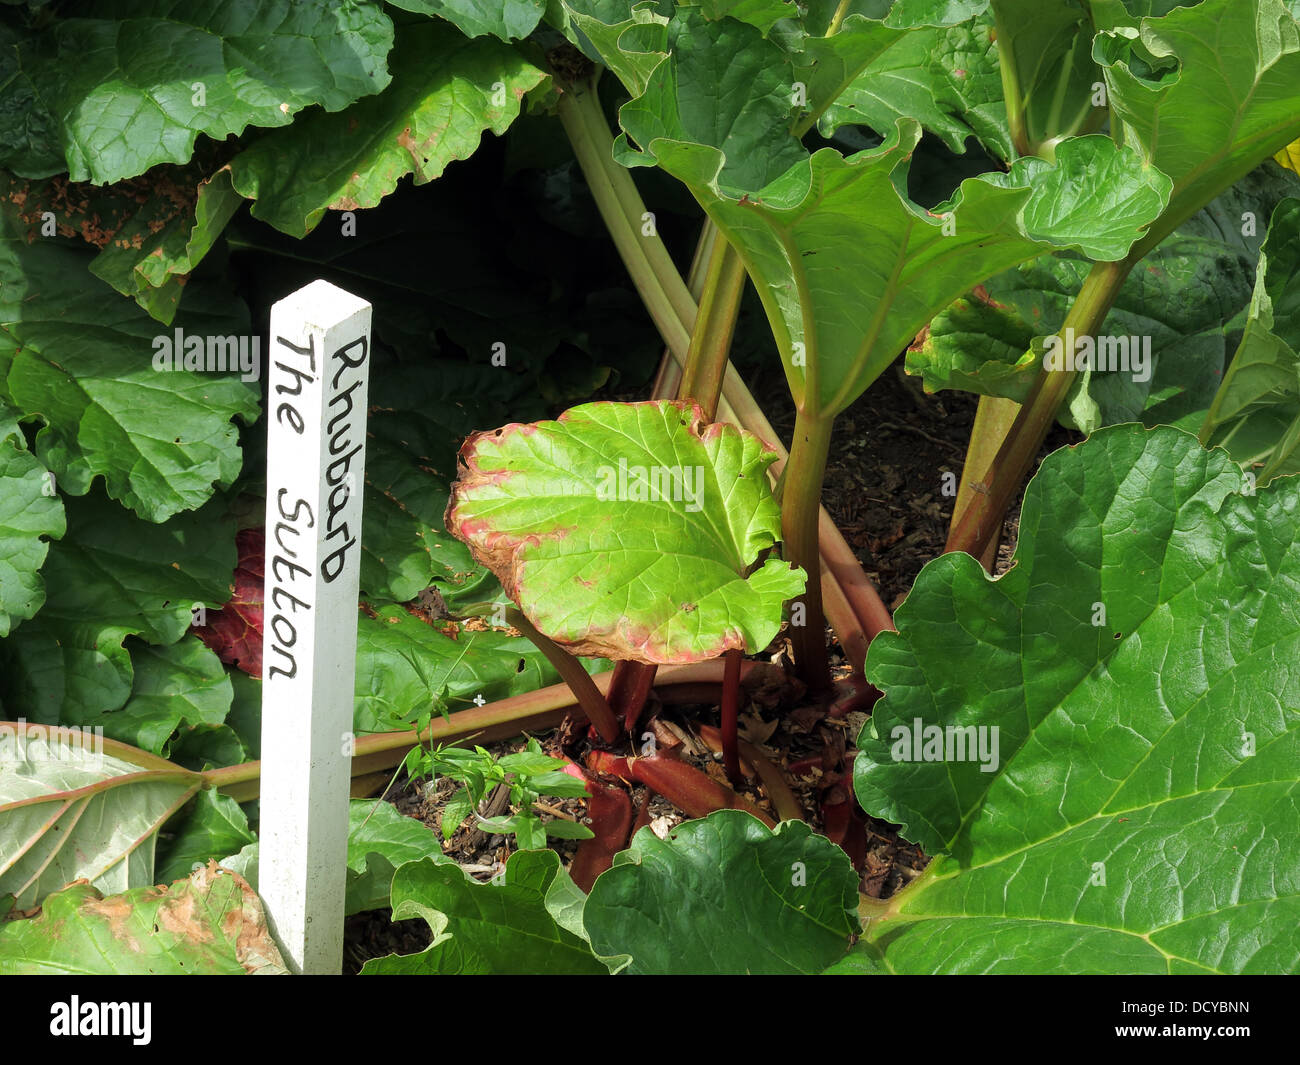 Growing food on the allotment - The Sutton Rhubarb Stock Photo